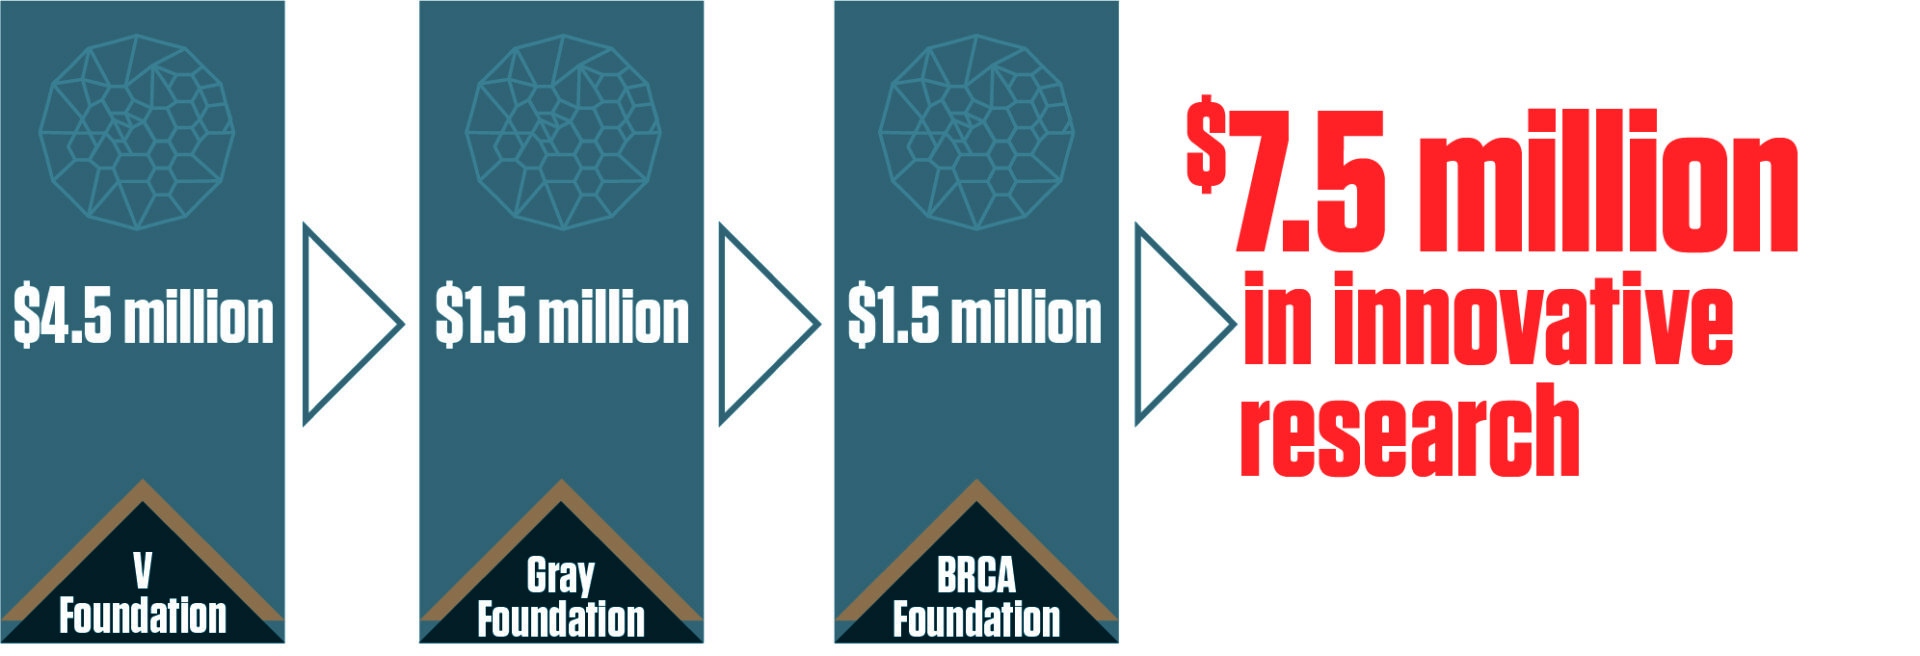 BRCA Mutation graphic showing the combined funding provided by Gray and the V foundation to the BRCA research center